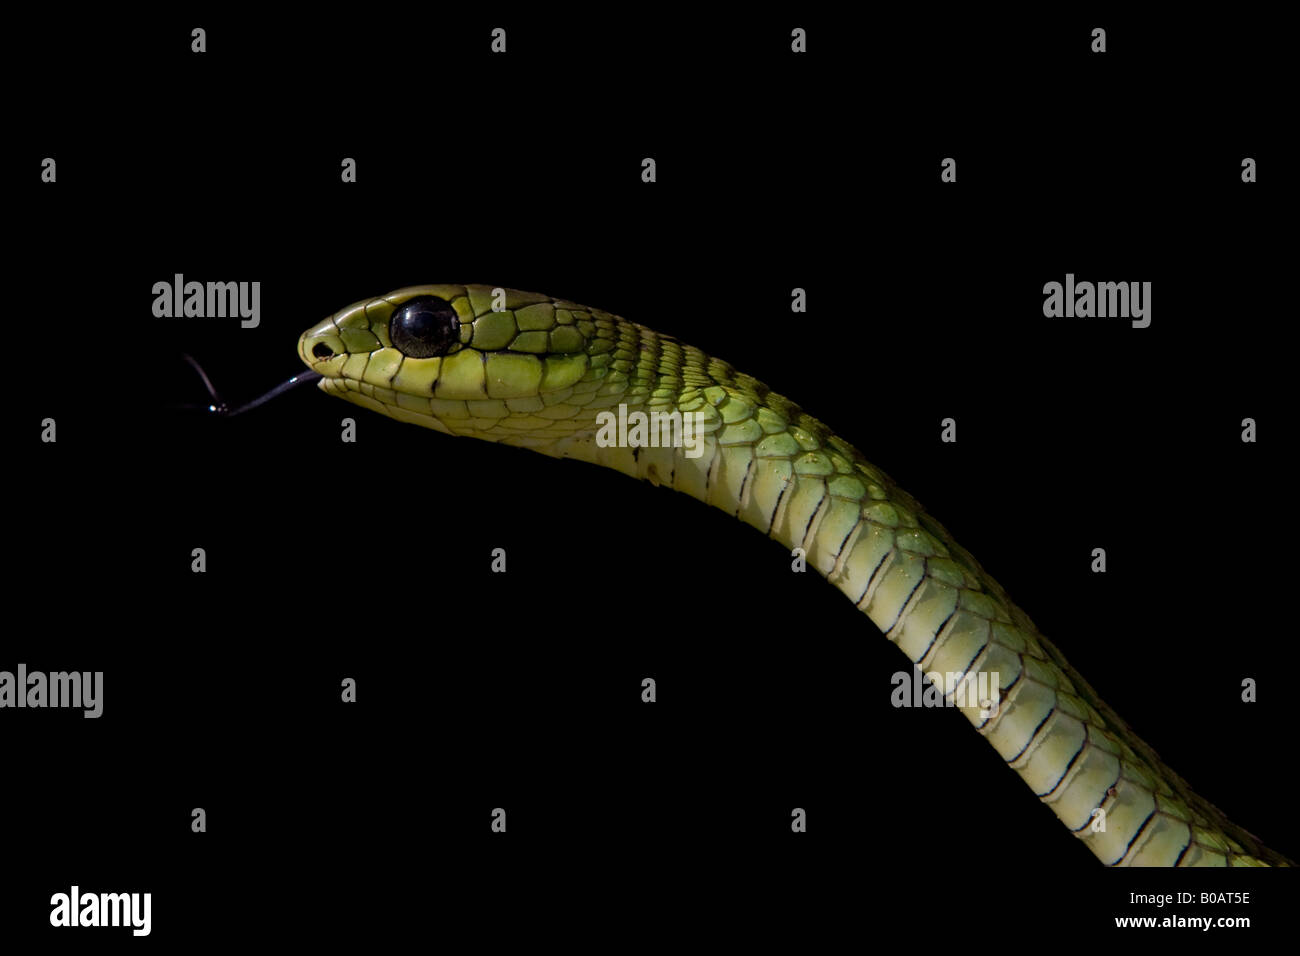 Boomslang (Dispholidus typus) snake tasting air with tongue set against a black background Stock Photo